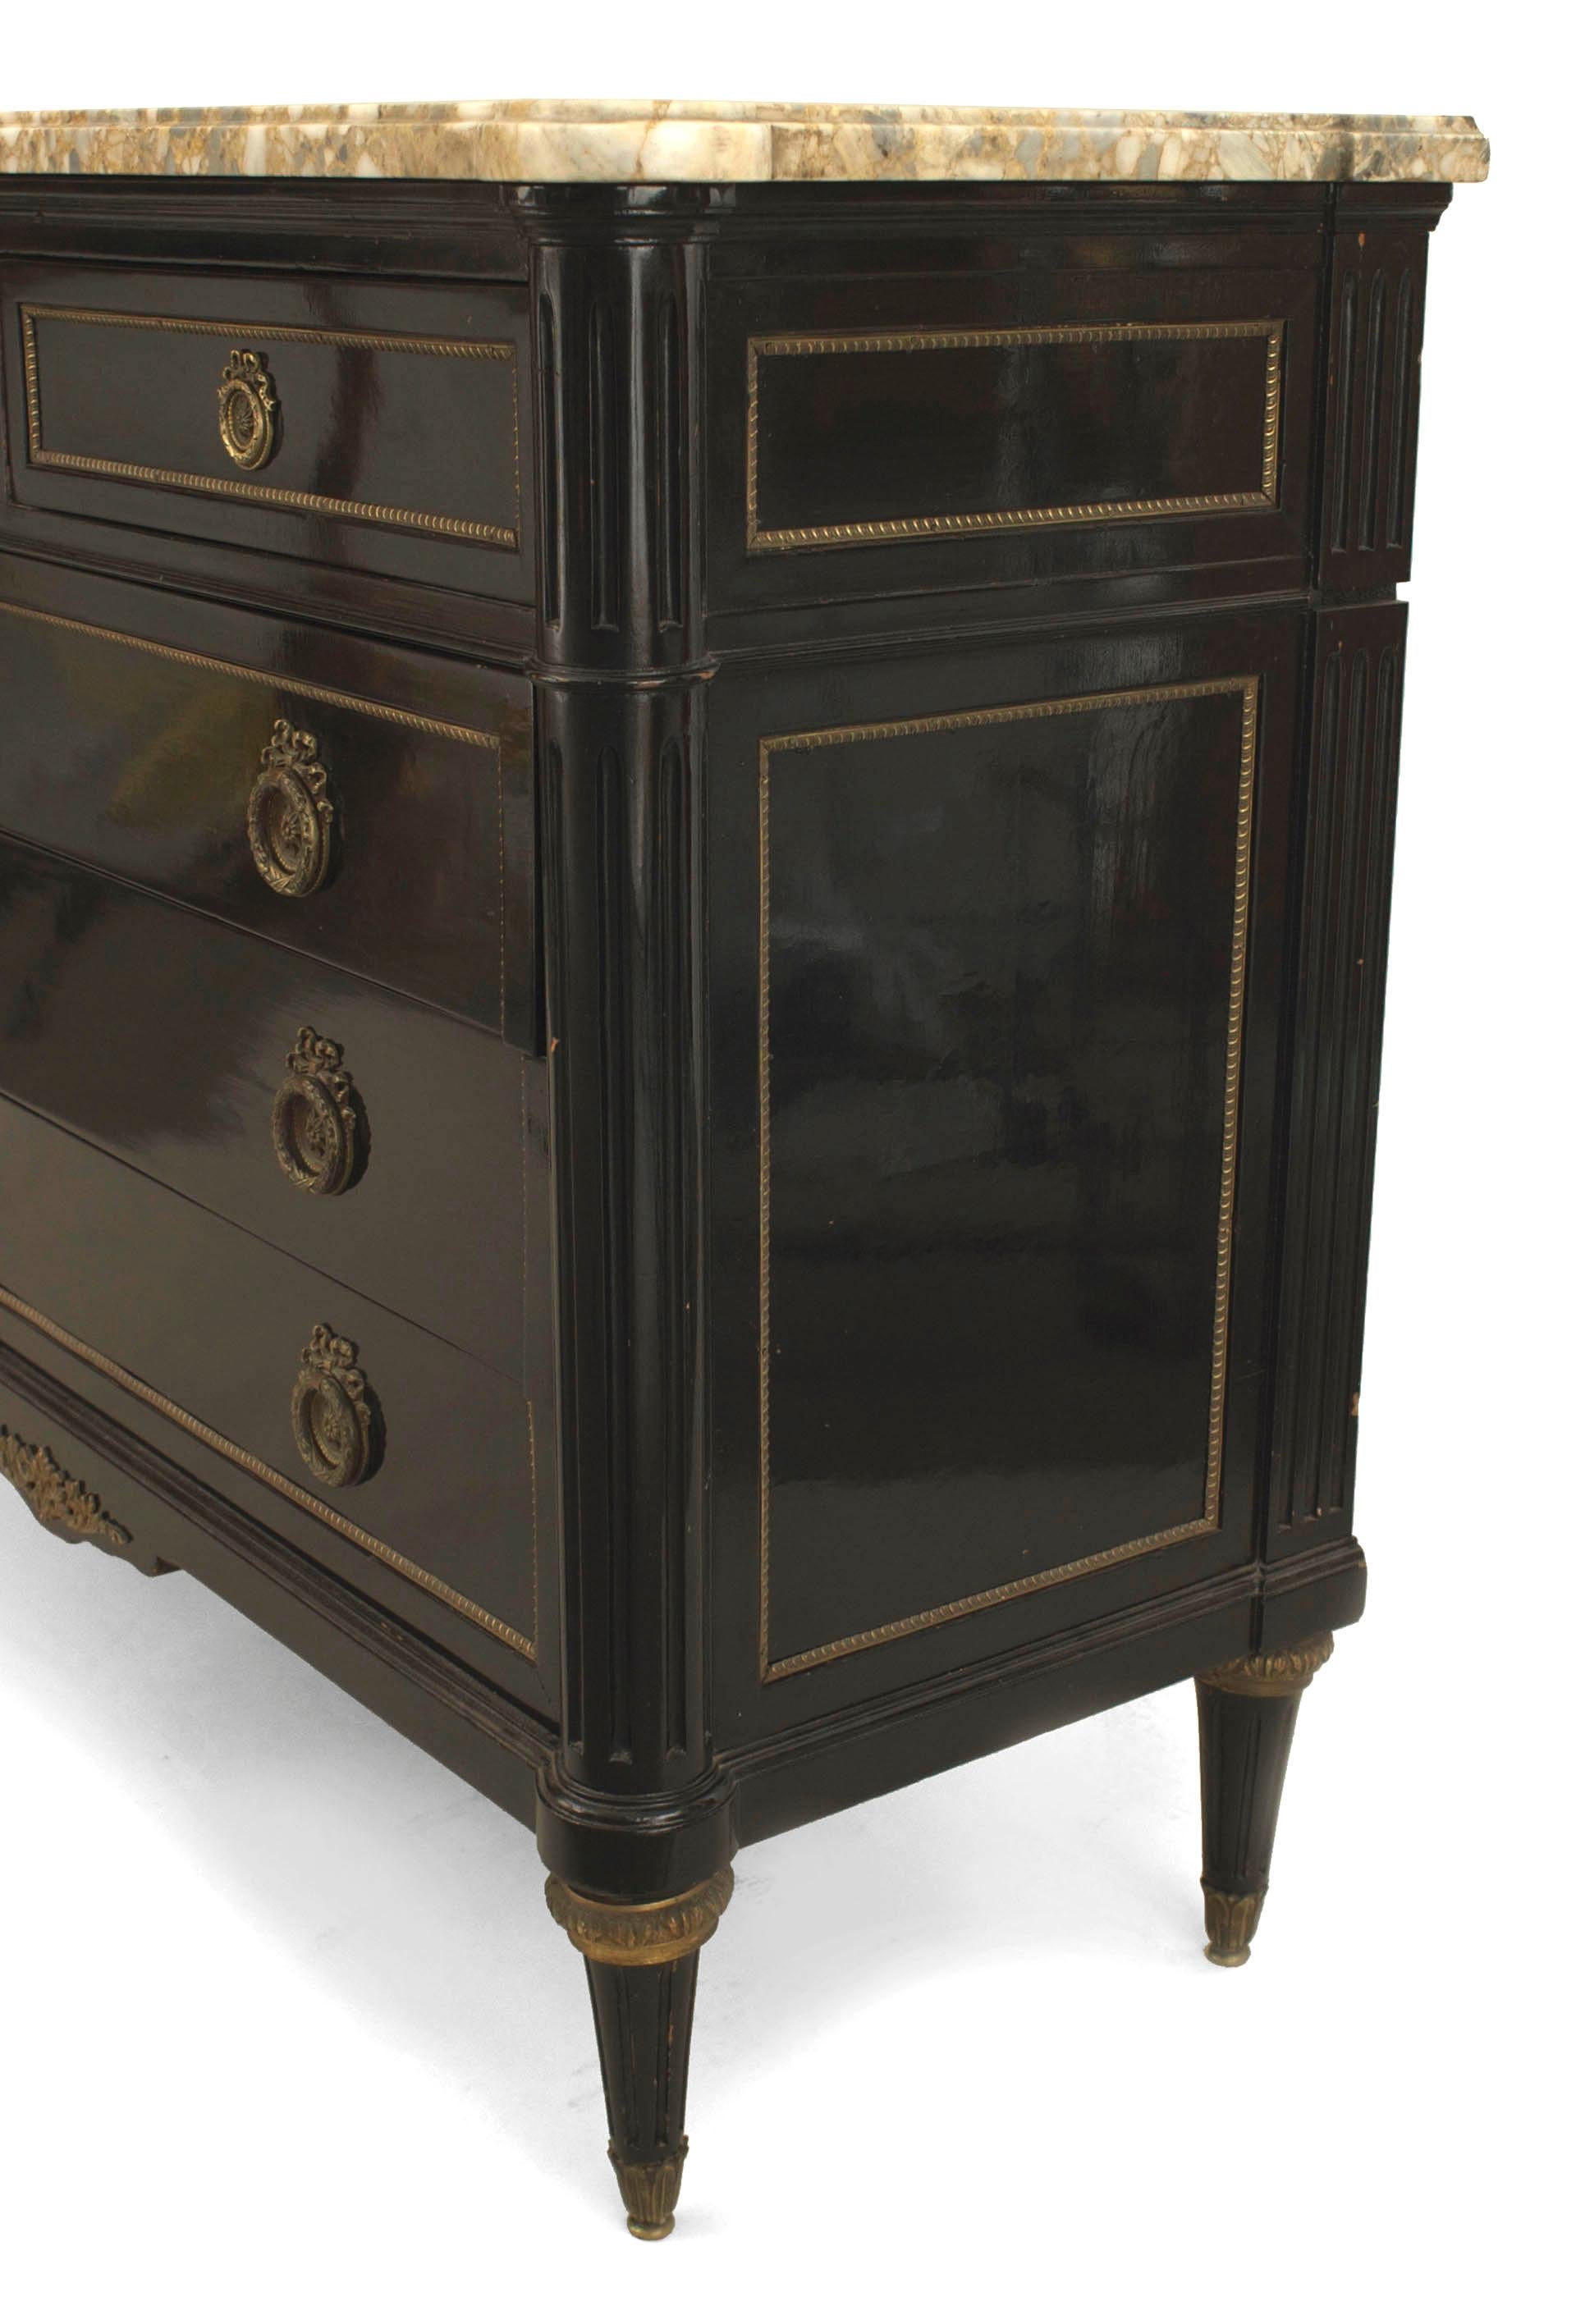 French 1940s (Louis XVI style) ebonized and bronze trimmed chest with three drawers over a pair of smaller drawers all having wreath and ring handles with a yellow marble top (Stamped: JANSEN).

Maison Jansen was a Paris-based interior